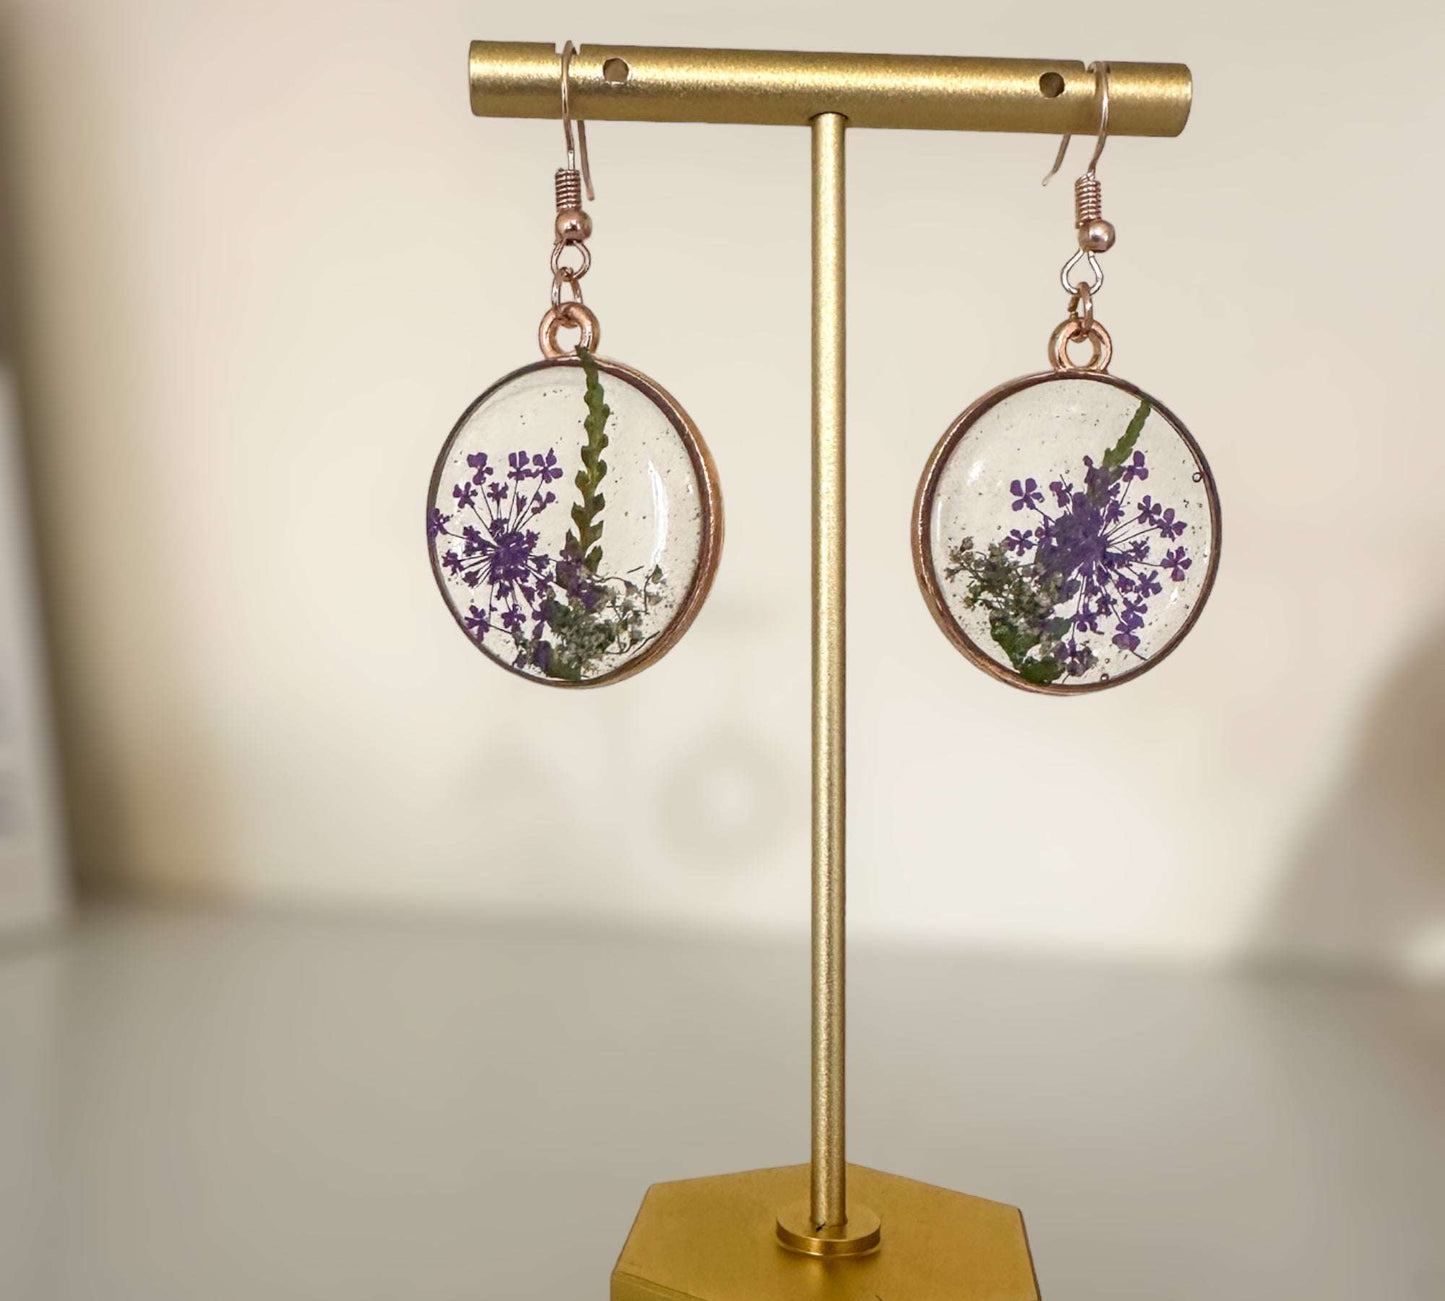 FLoral Earrings: Petal Whispers - Nature Inspired with Dried Flowers